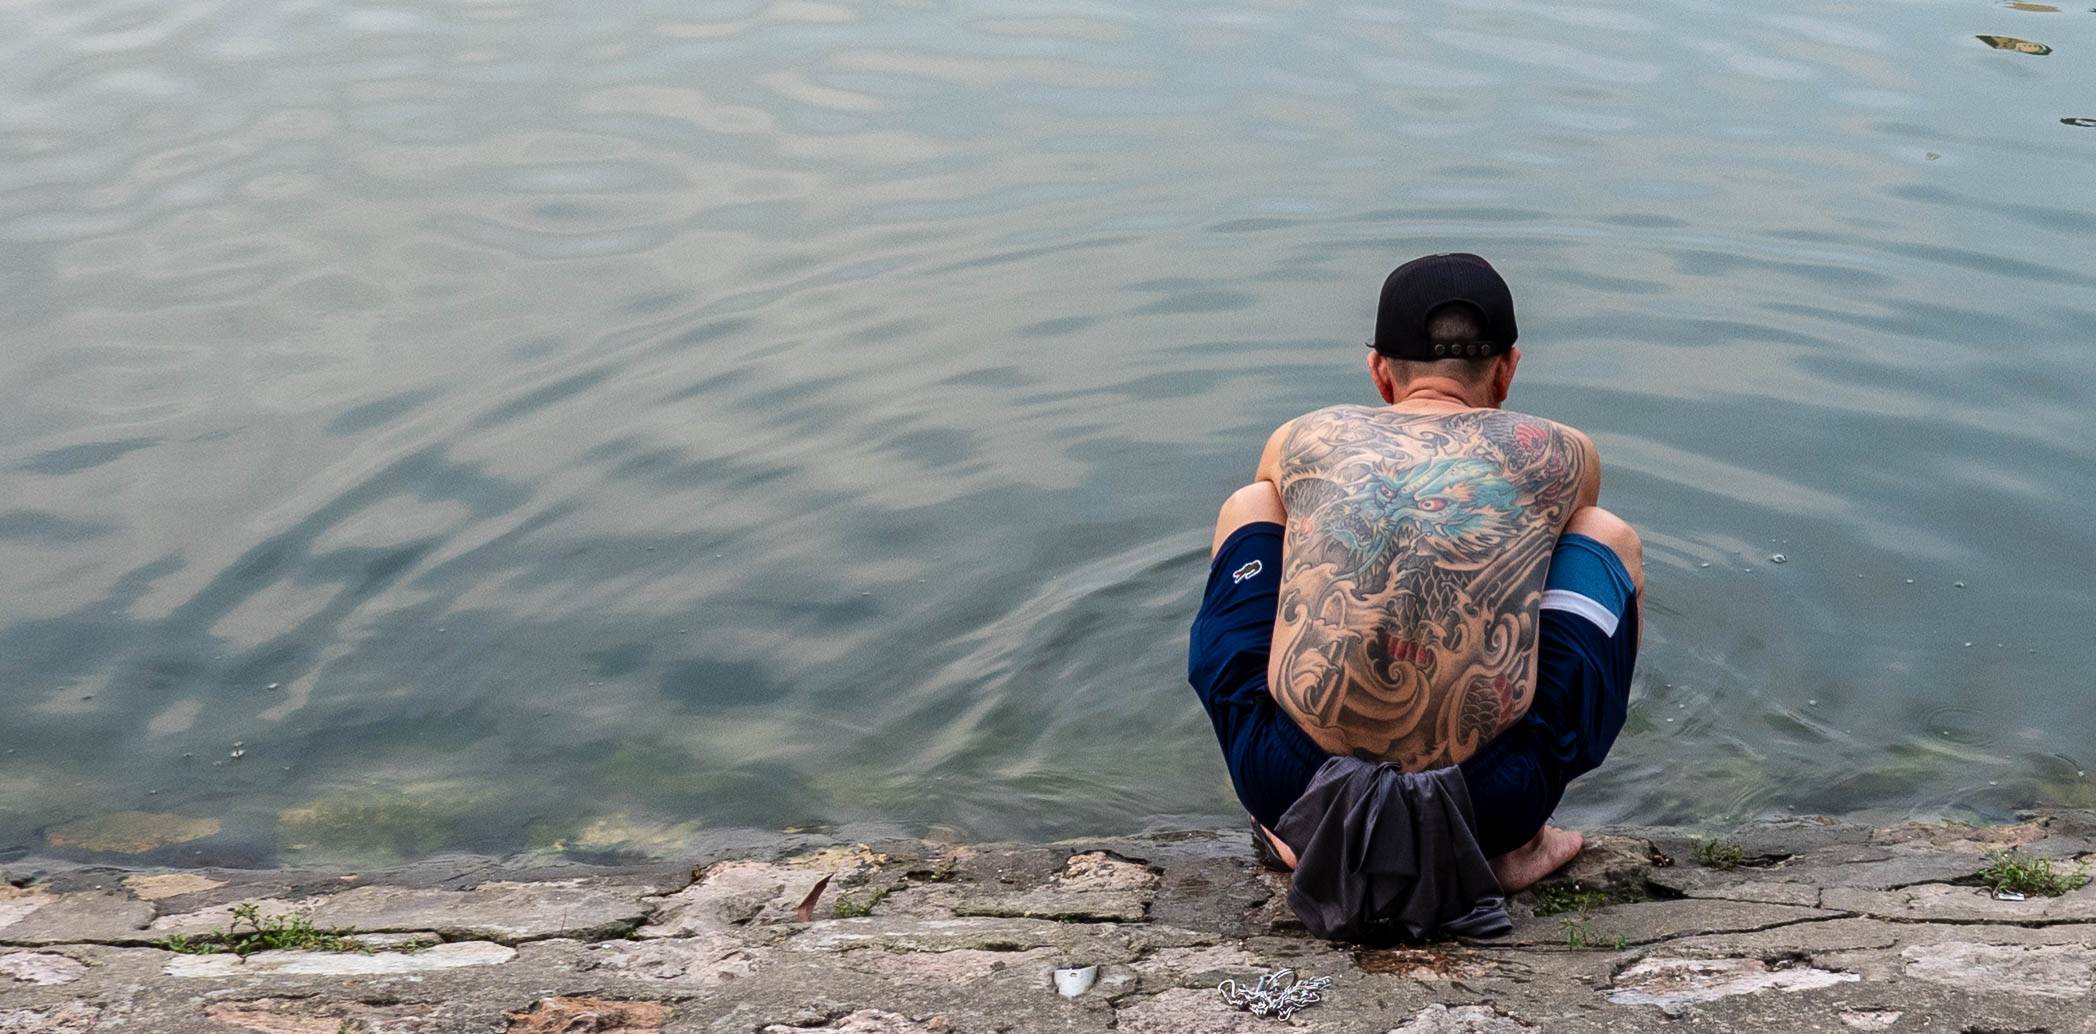 man squatting in front of lake with dragon tattoo on back